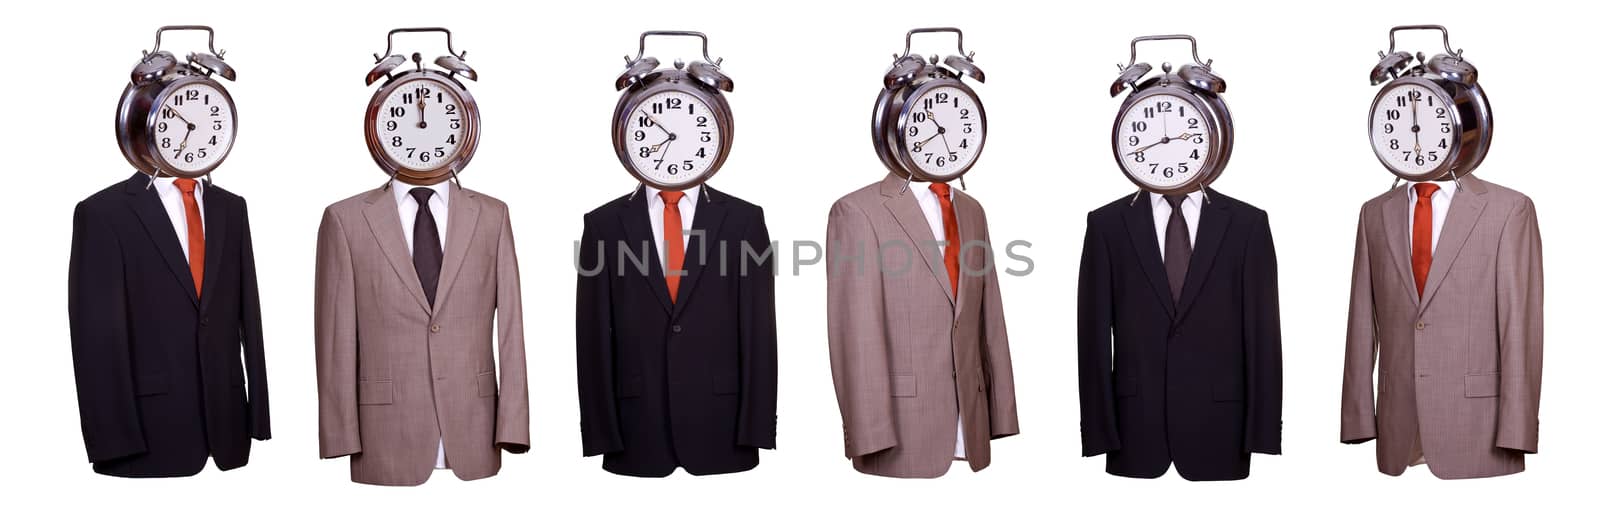 concept of body with suit and tie with alarm bell as face